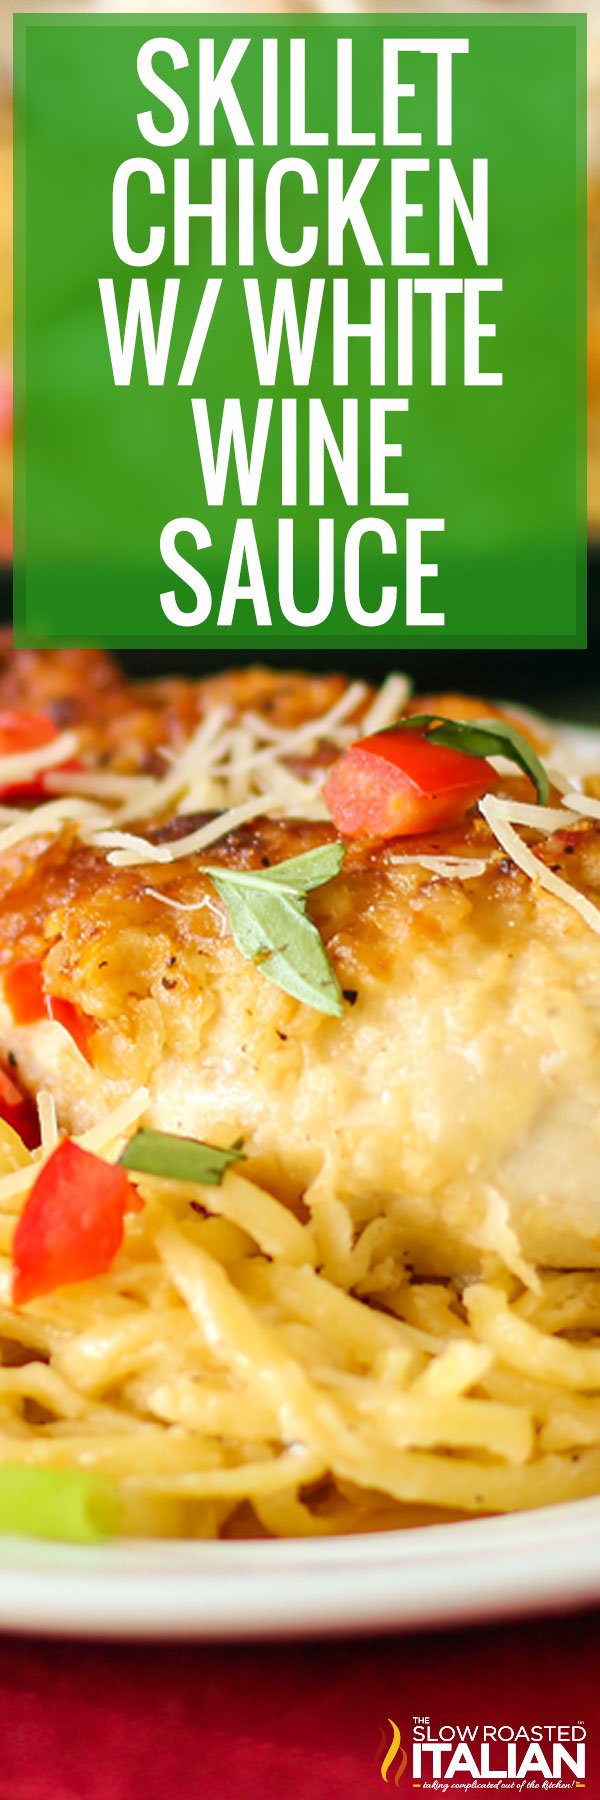 titled image (and shown): skillet chicken with white wine sauce